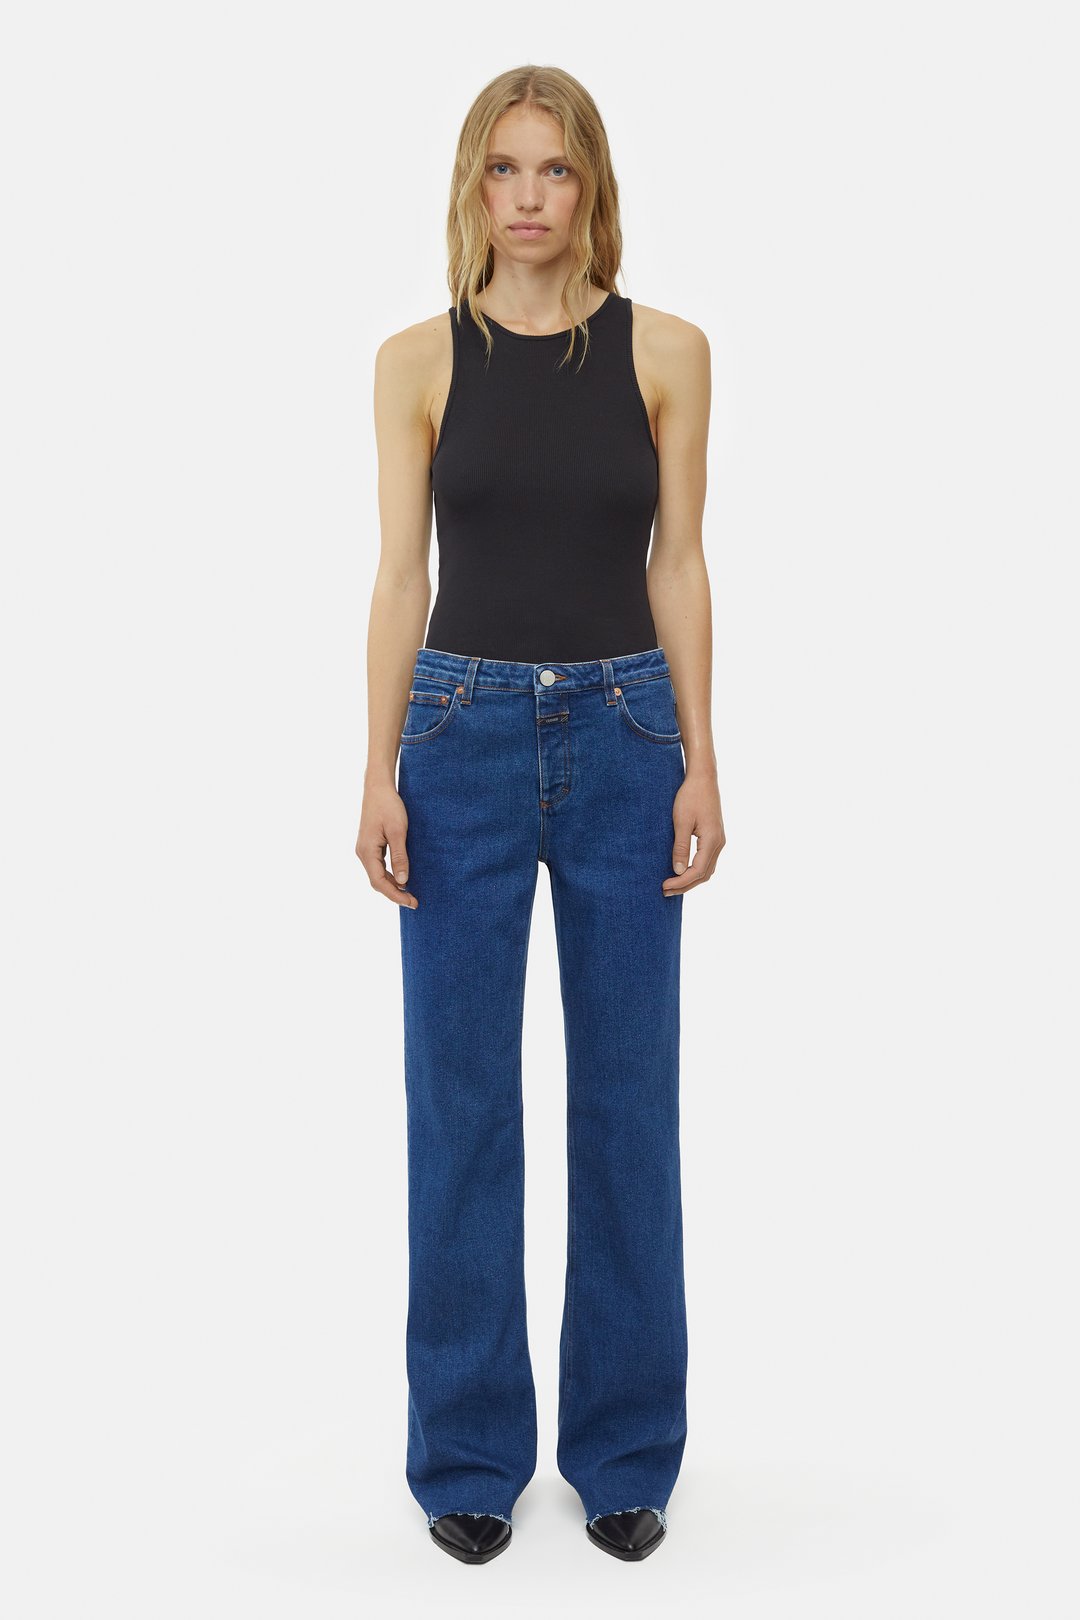 SLIM JEANS - STYLE NAME | CLOSED GILLAN